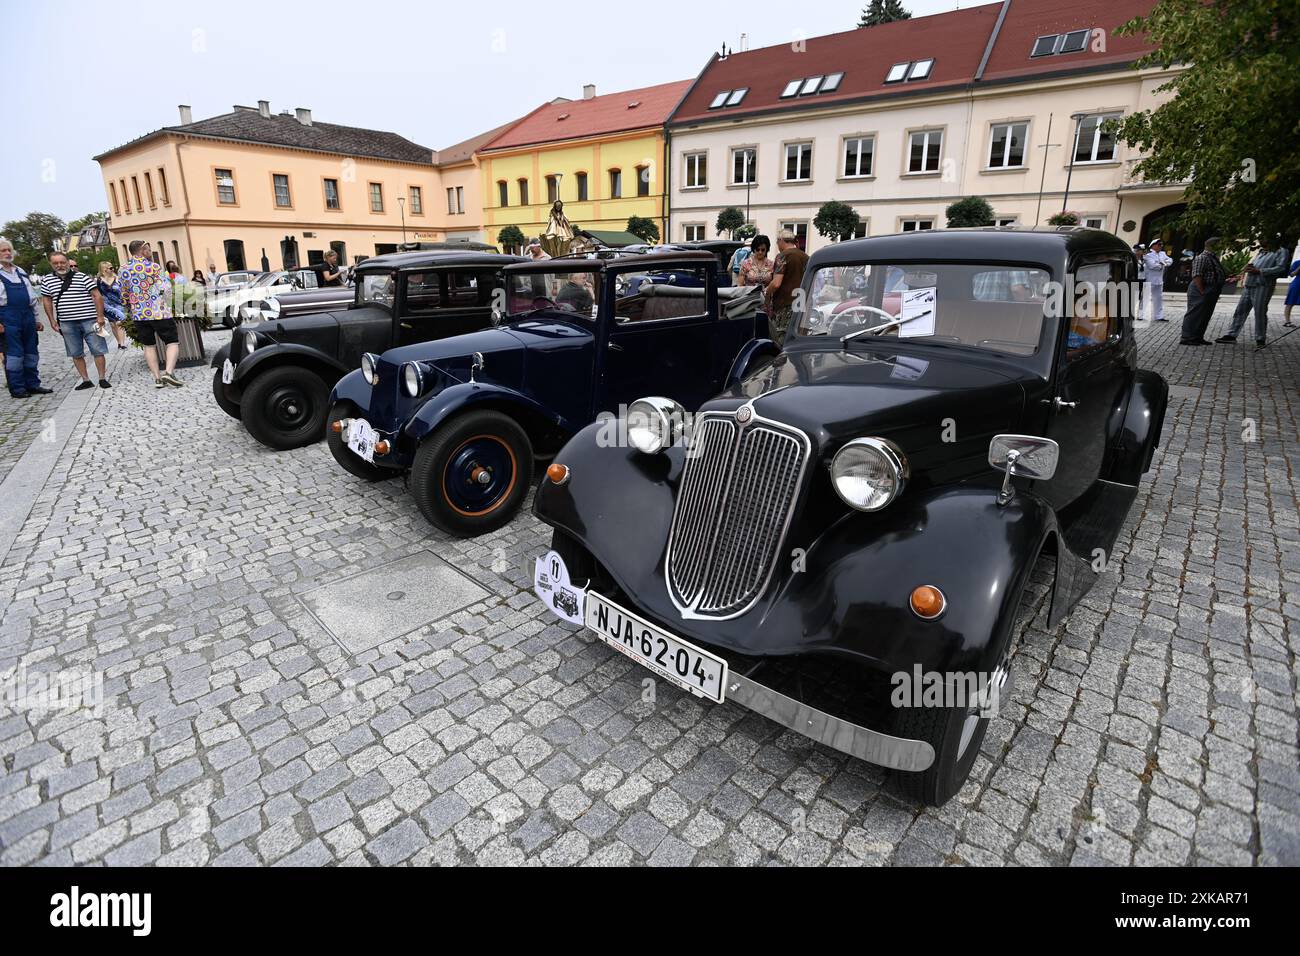 Bystrice Pod Hostynem, Czech Republic. 20th July, 2024. Show of historic vehicles at Masaryk Square in Bystrice pod Hostynem, Kromeriz Region, Czech Republic, July 20, 2024. Pictured car Tatra T 57a. Credit: Dalibor Gluck/CTK Photo/Alamy Live News Stock Photo